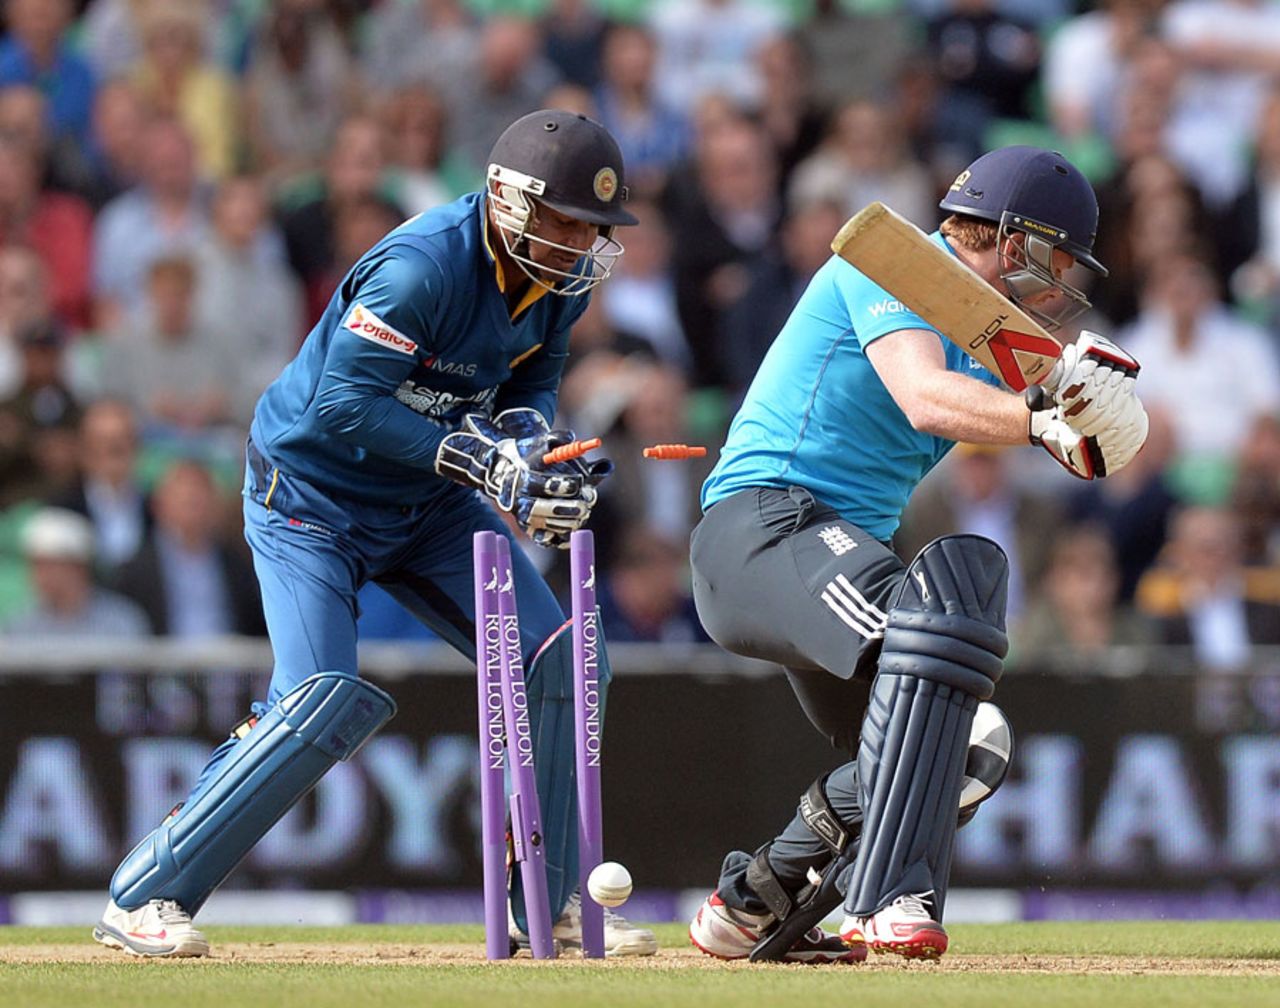 Eoin Morgan was promoted in the batting order but played on for just 3, England v Sri Lanka, 1st ODI, The Oval, May 22, 2014